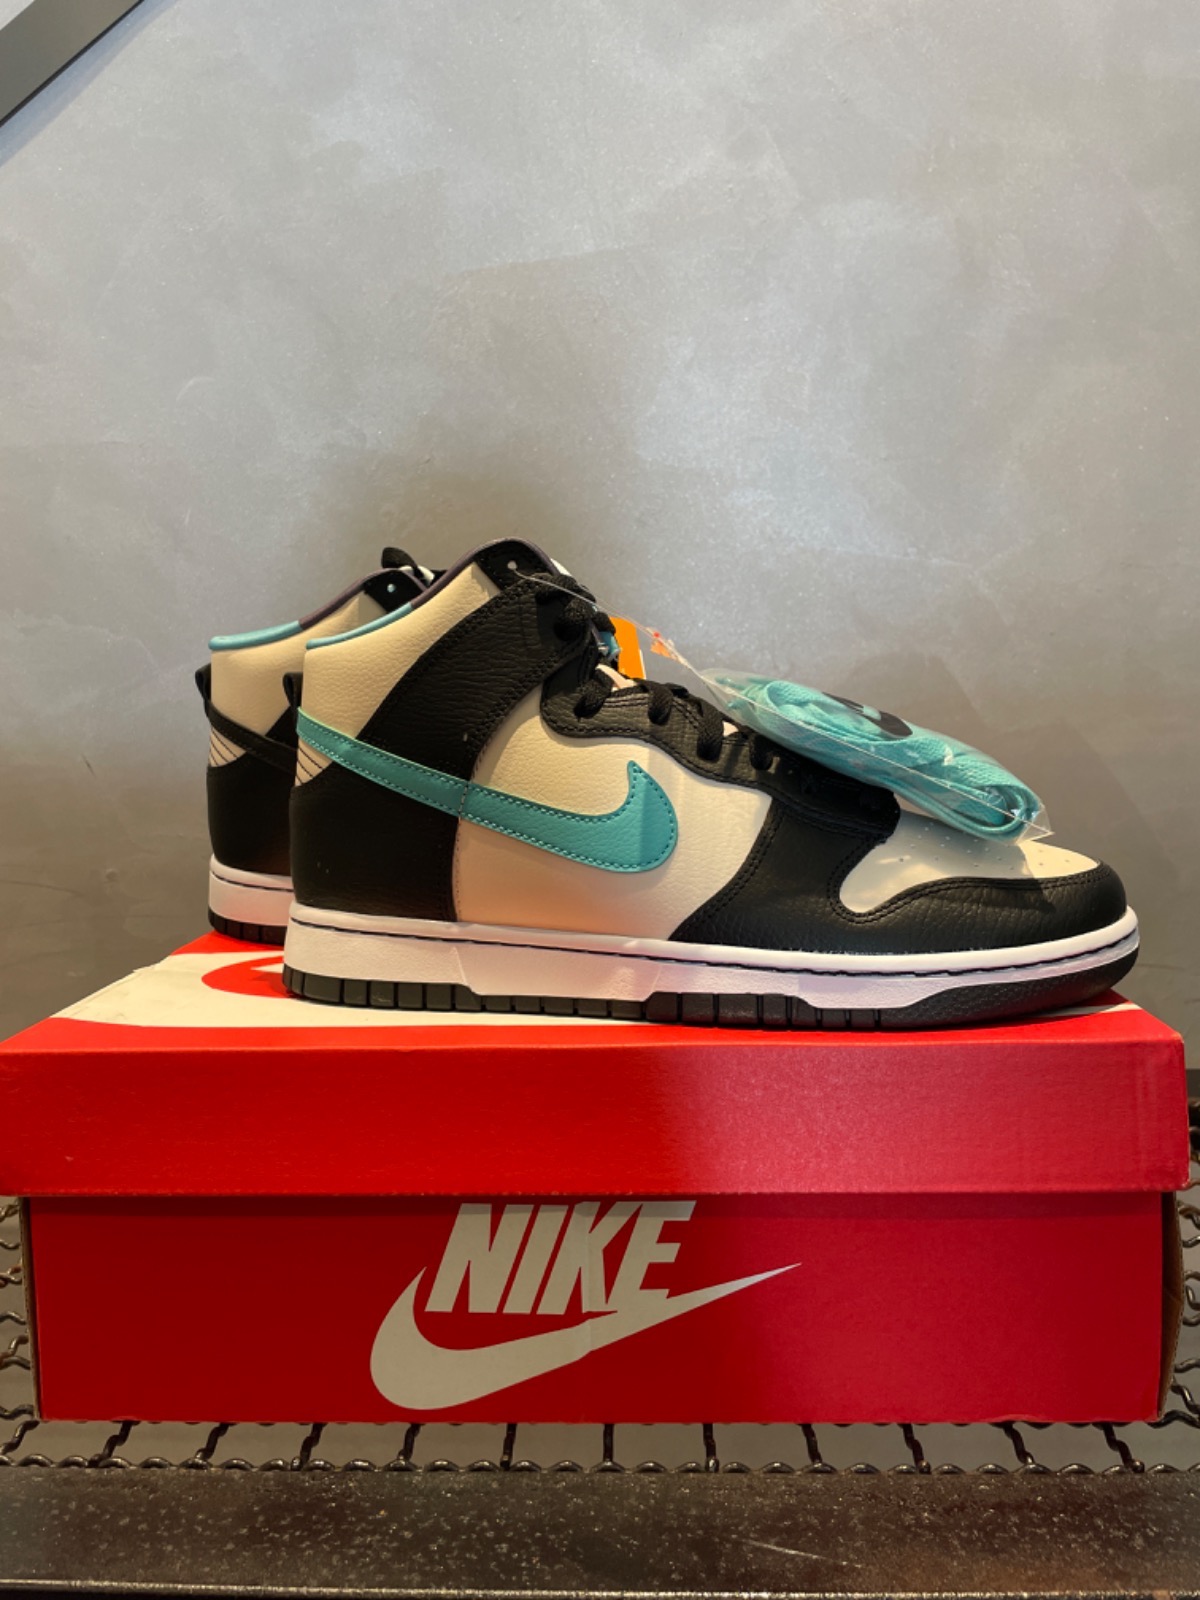 Nike Dunk High Retro EMB Pearl White and Washed Teal